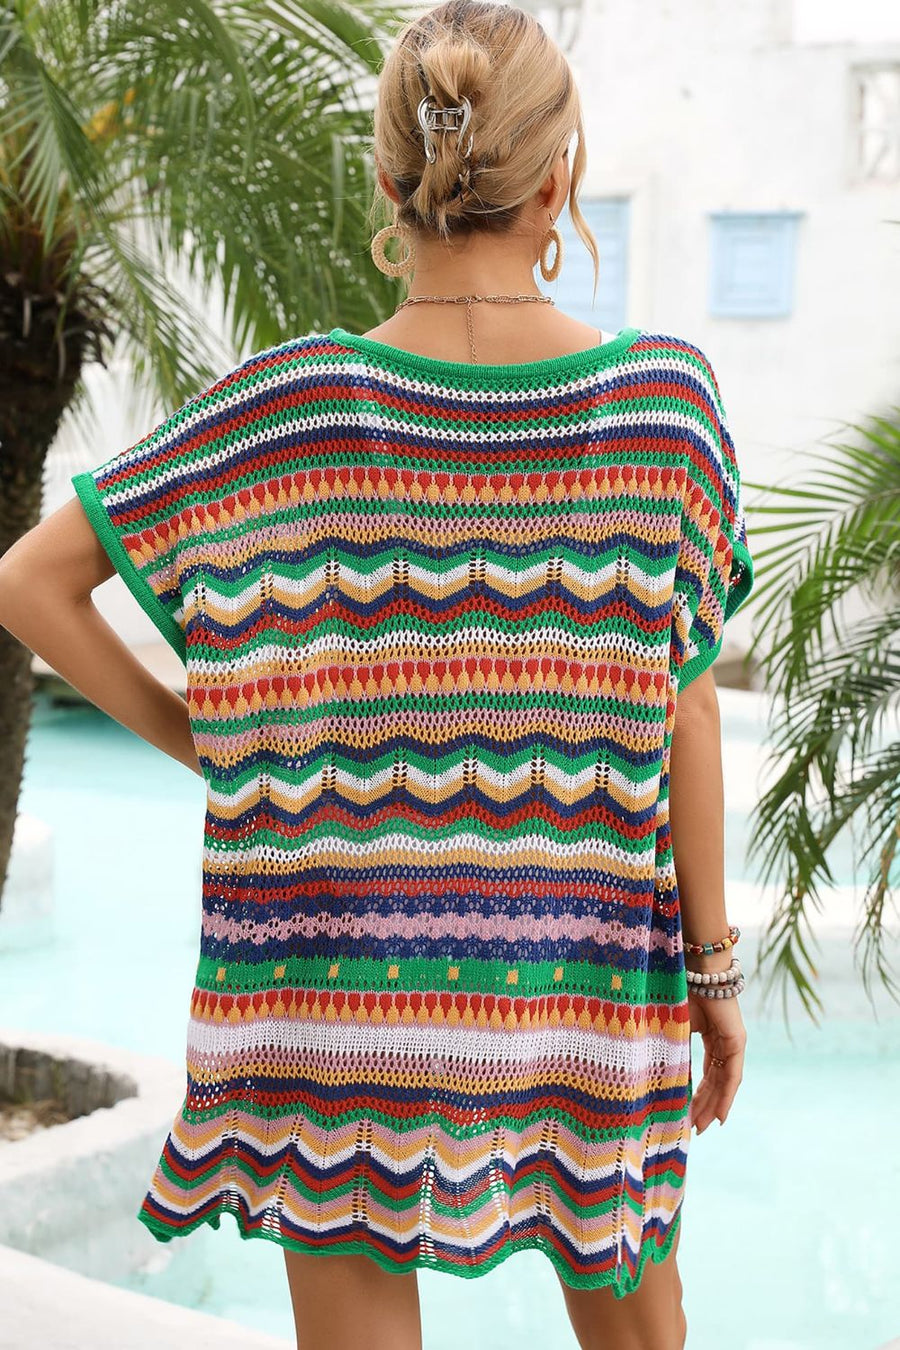 Rainbow Surprise Scalloped Cover-Up